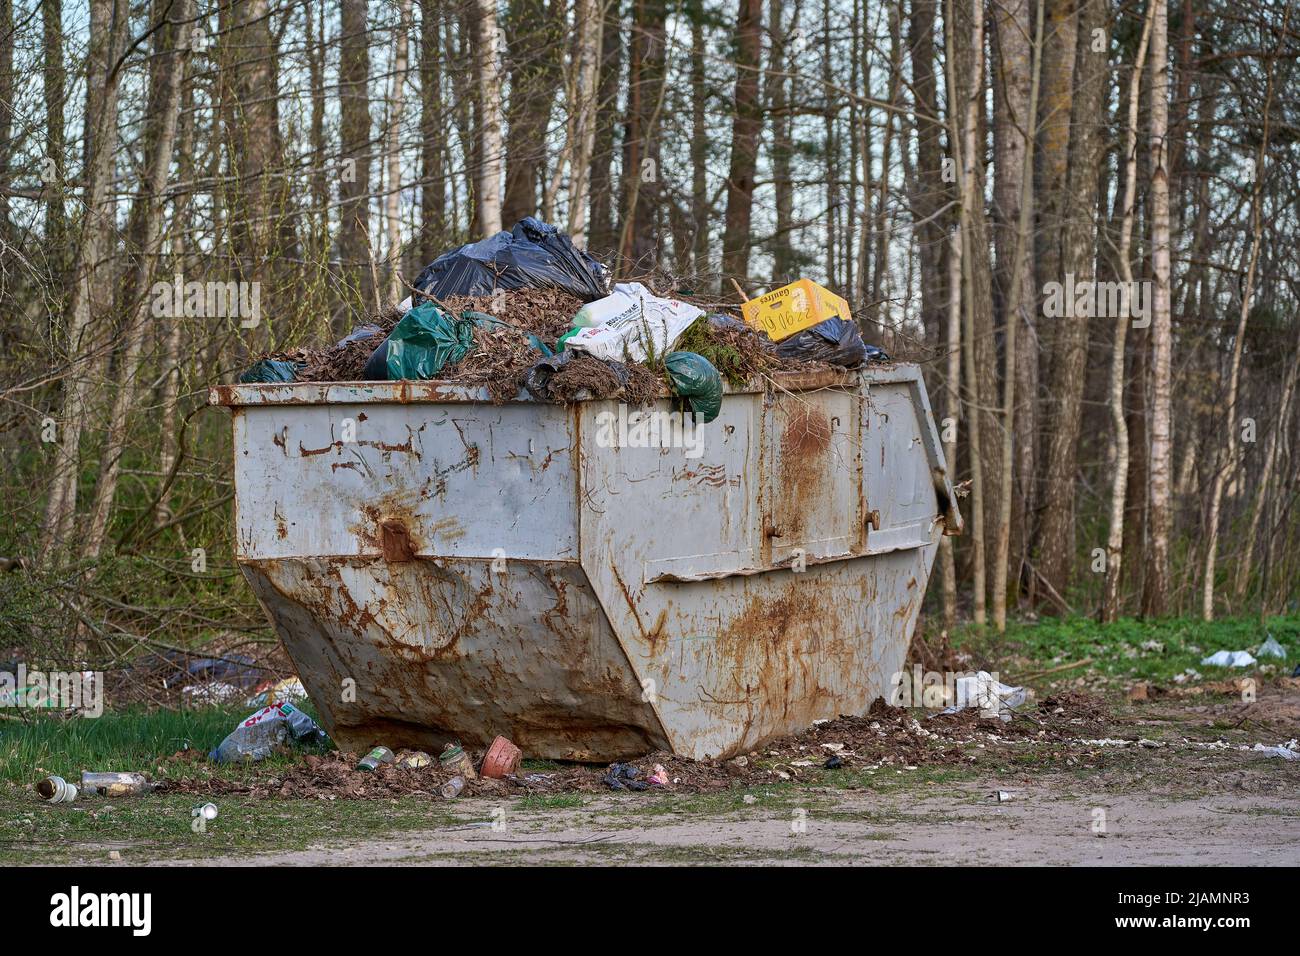 An old rusty metal container overflowing with rubbish. Some garbage lying around. Many trees at the background. Stock Photo